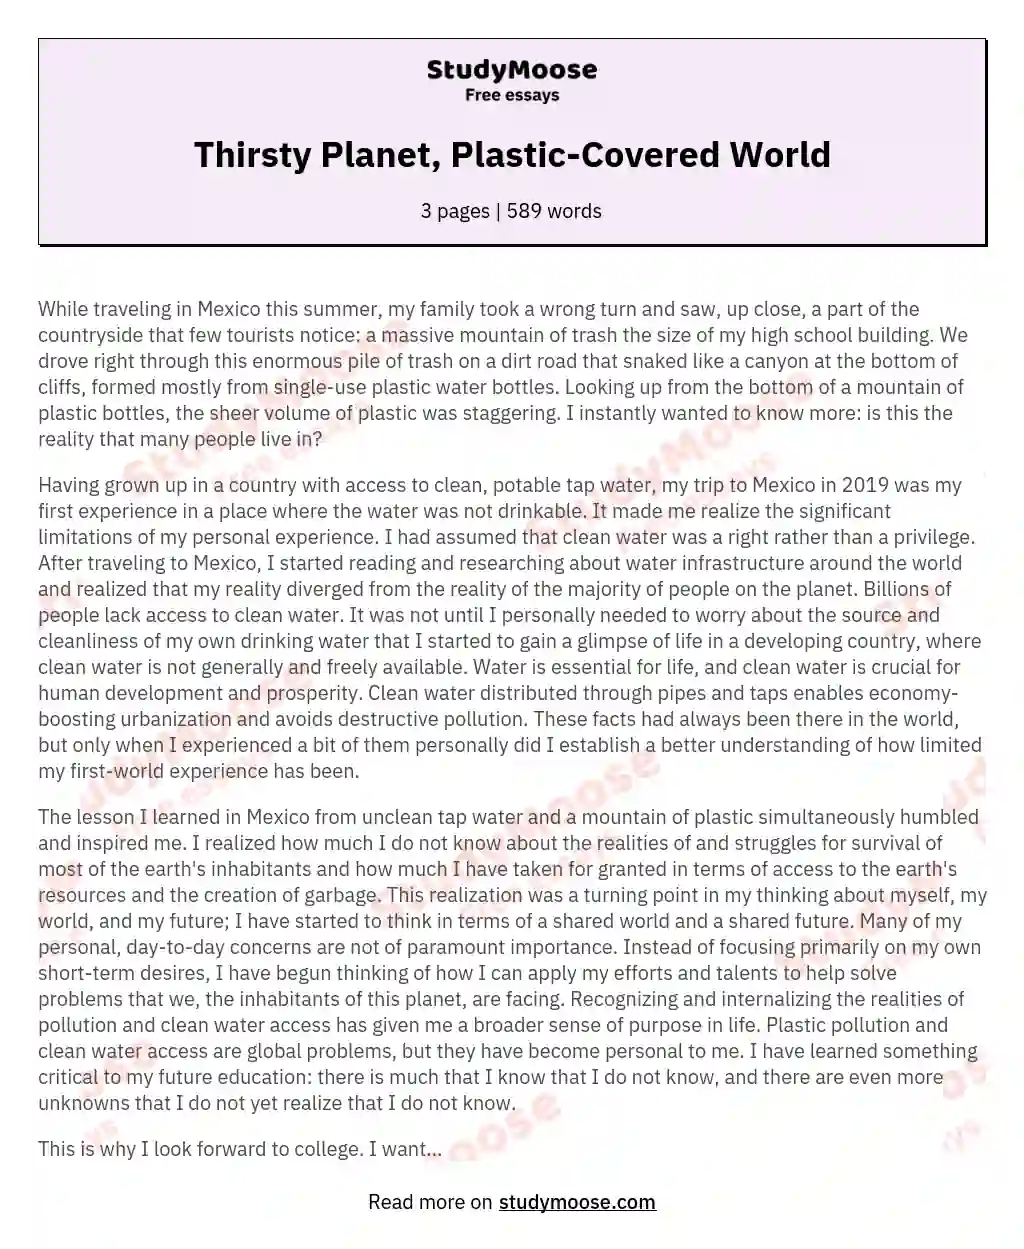 Thirsty Planet, Plastic-Covered World